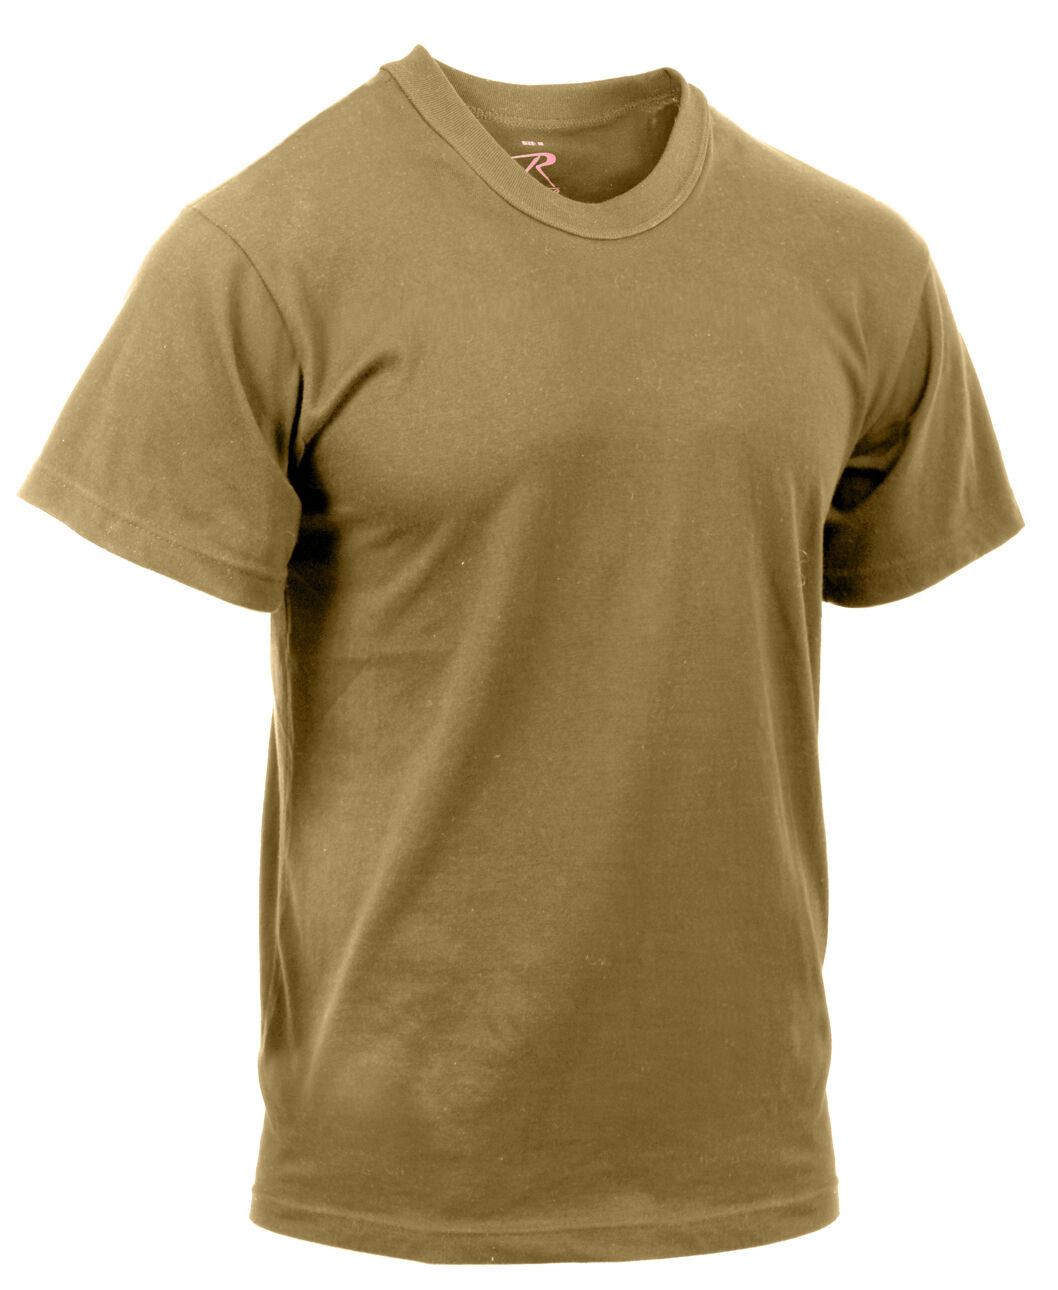 Rothco Moisture Wicking T-Shirts - 5 Pack Brown